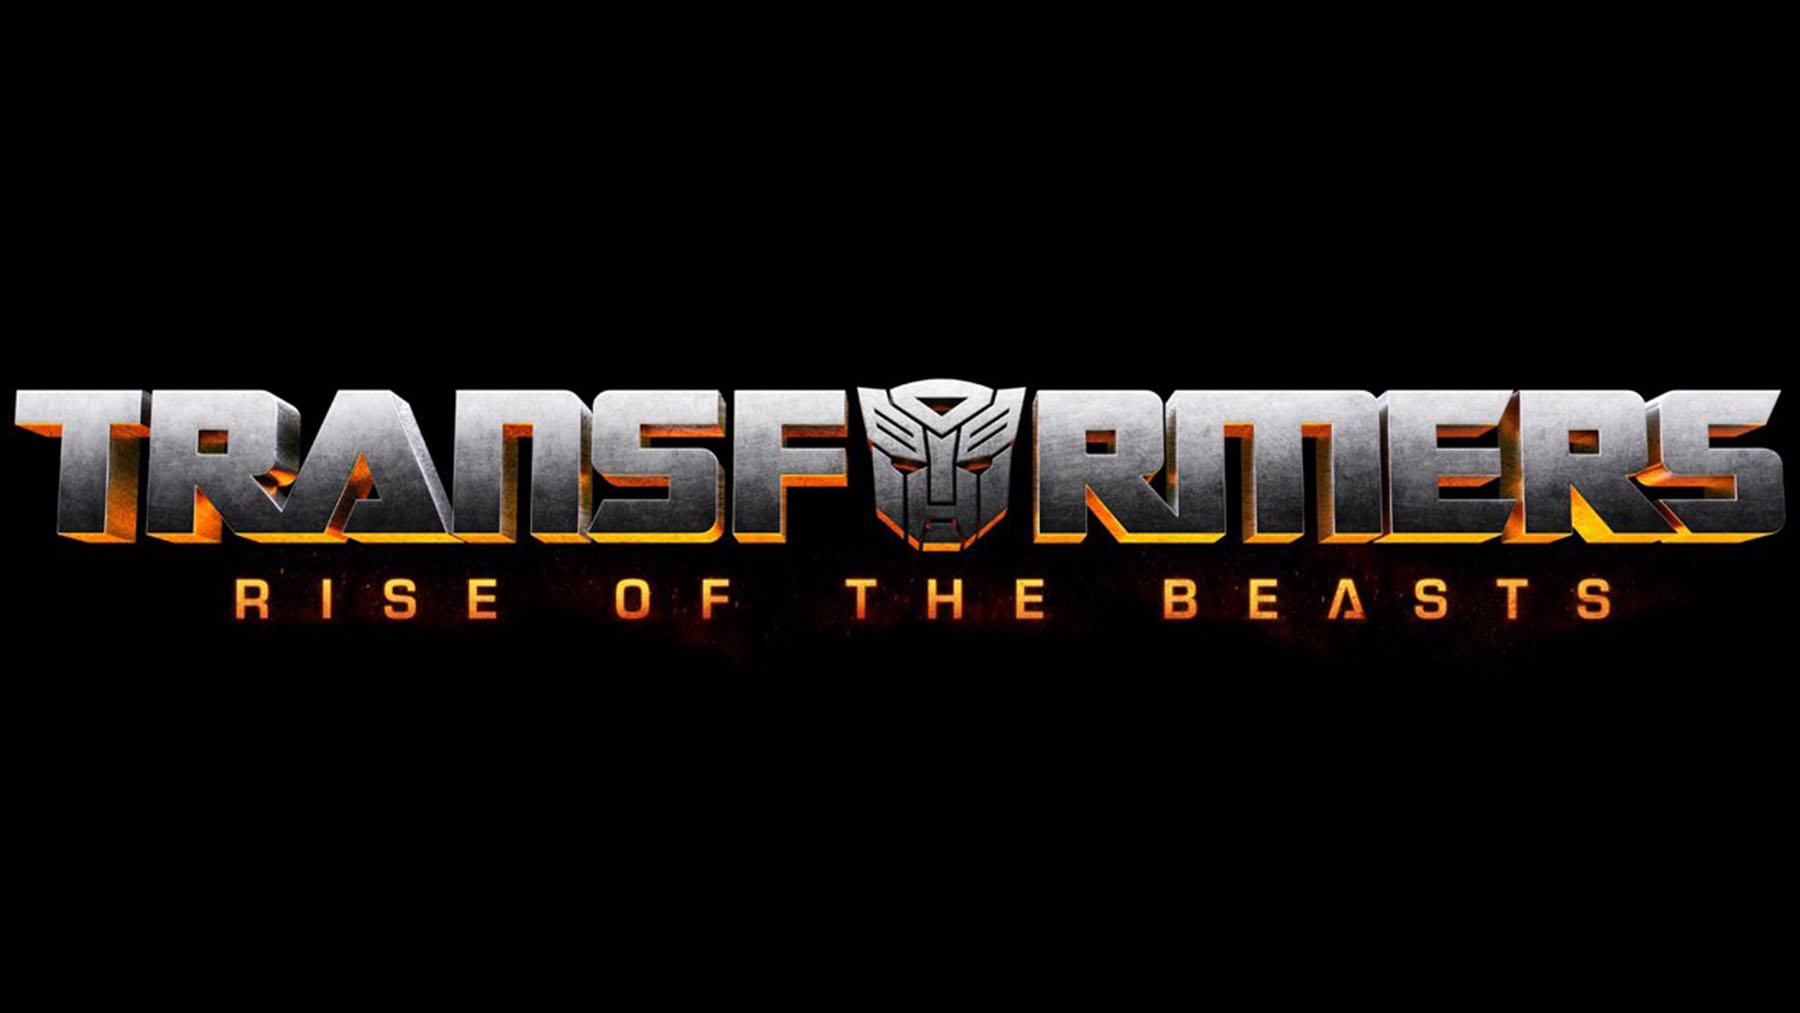 ‘Transformers Rise of the Beasts’ (Paramount Pictures)